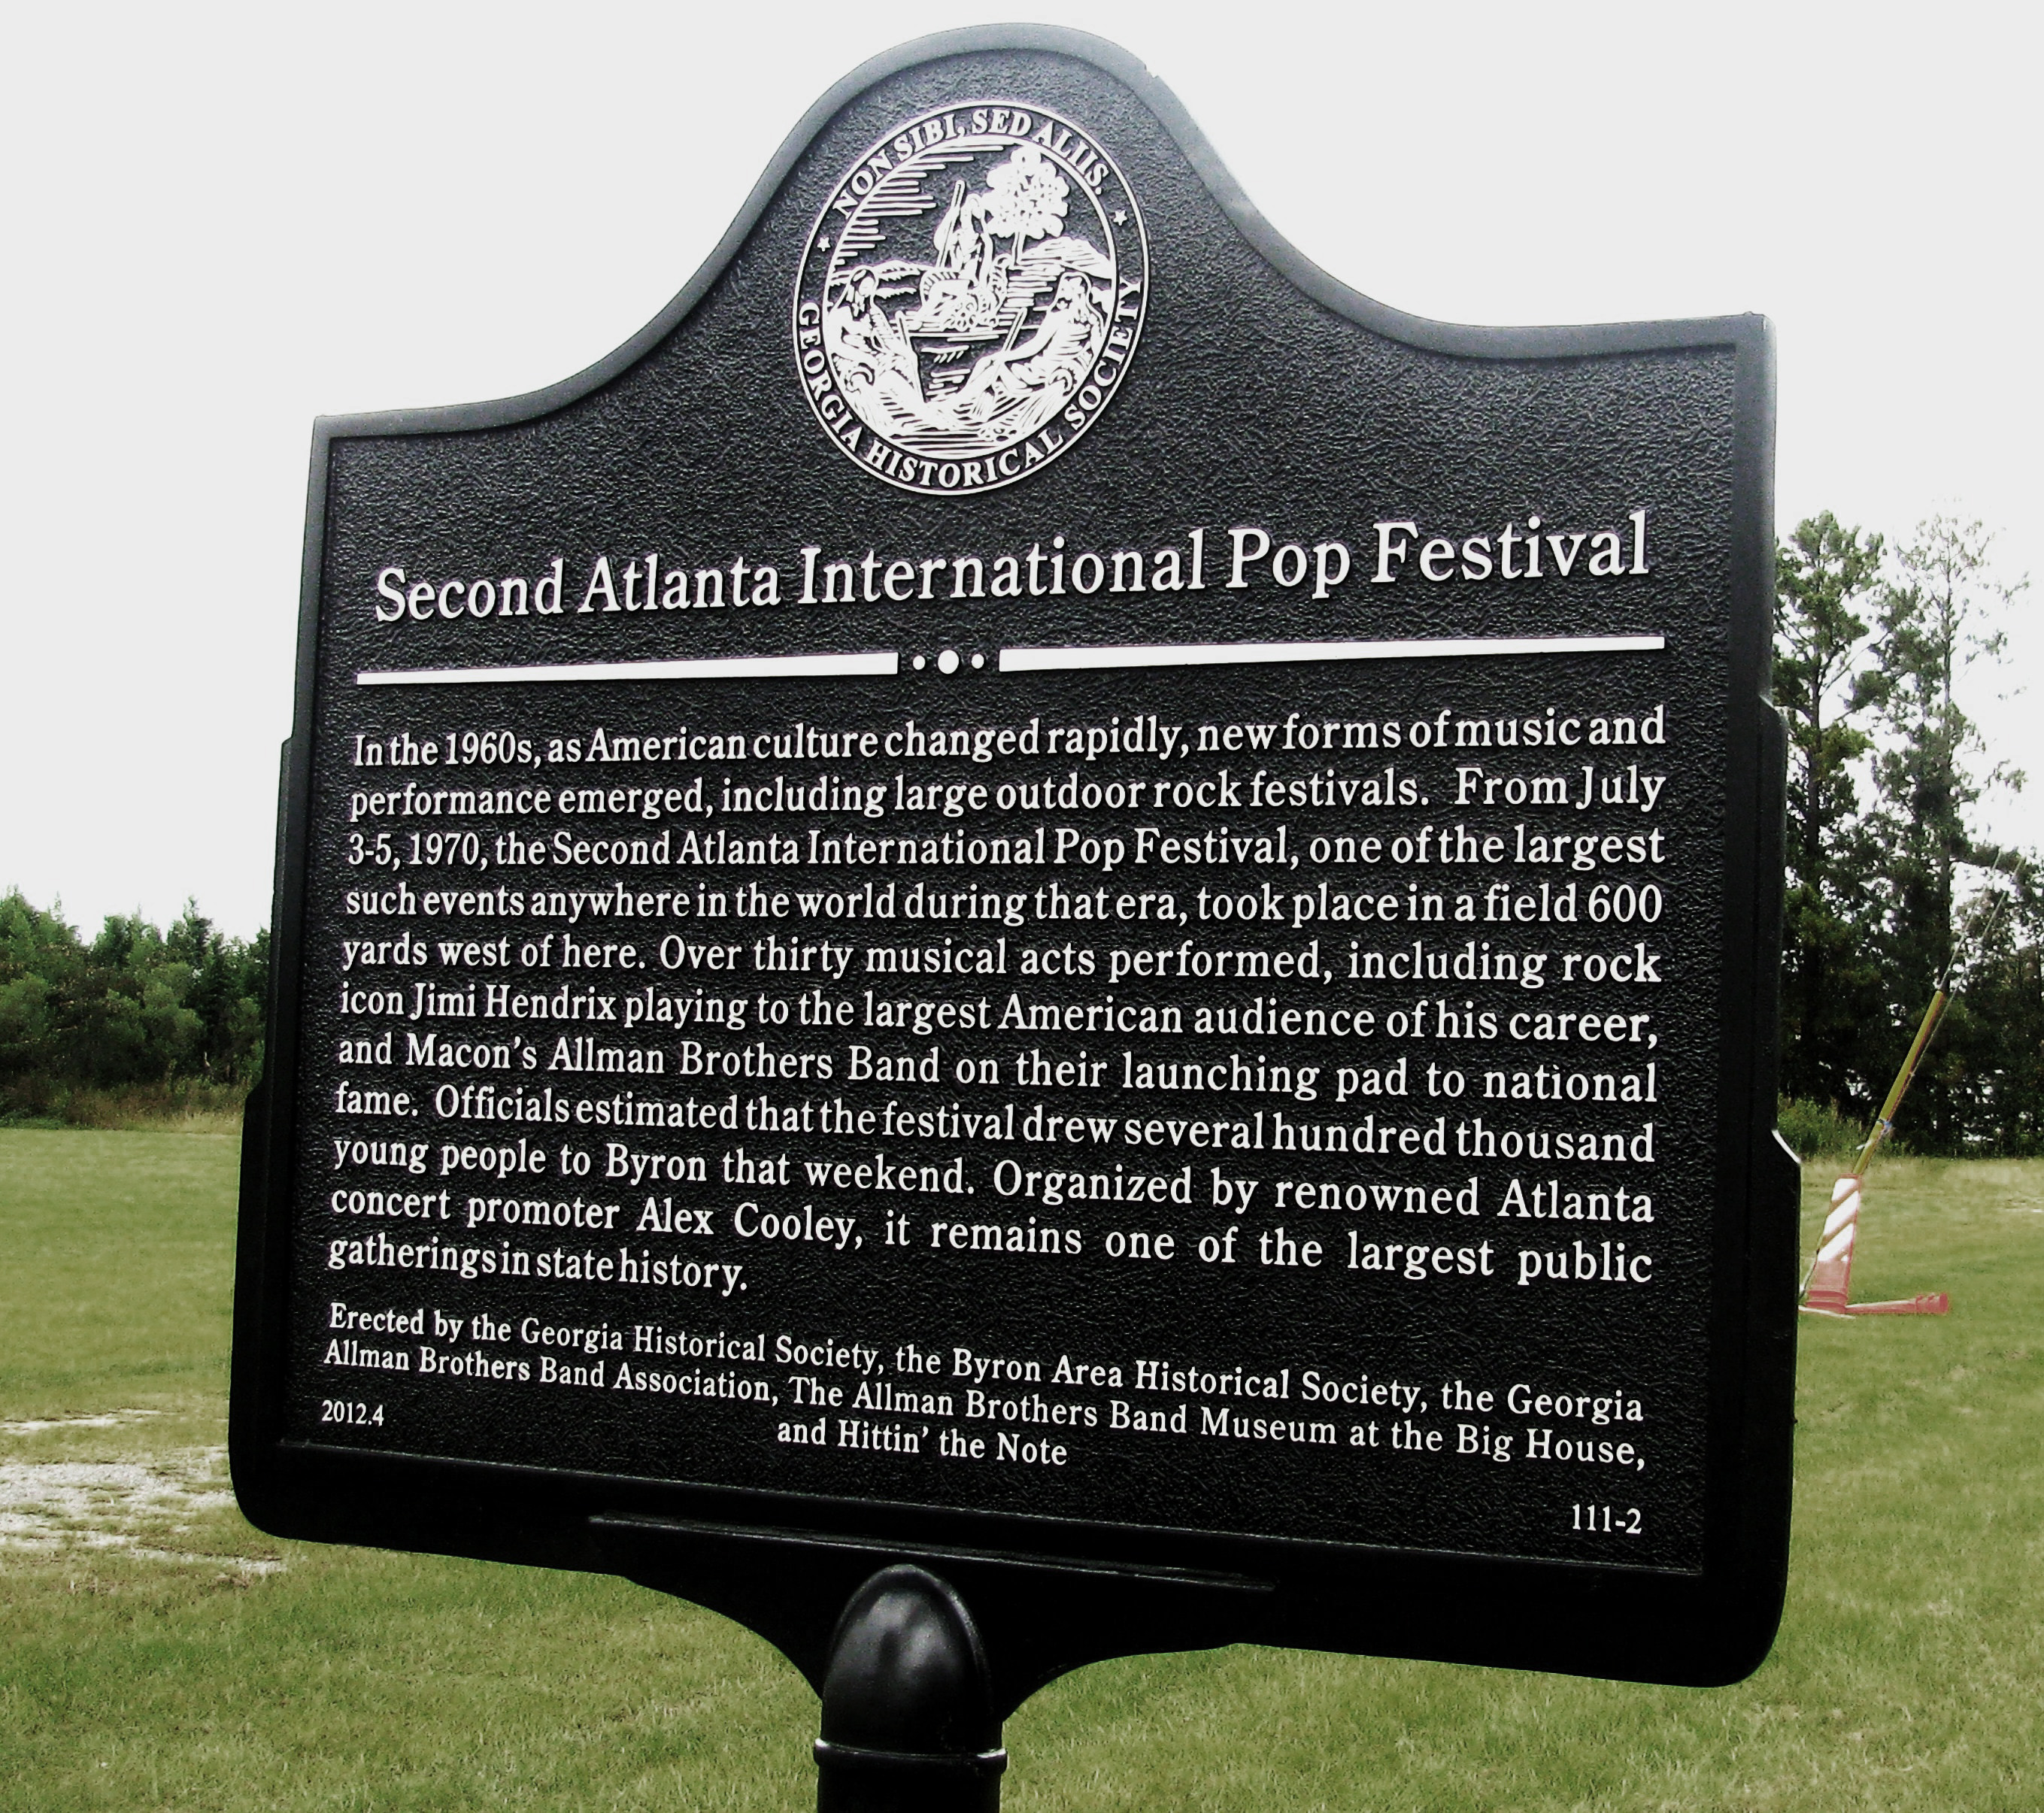 Thanks to John Charles Griffin for sending us this picture of the historic marker for the Second Atlanta Pop International Festival.